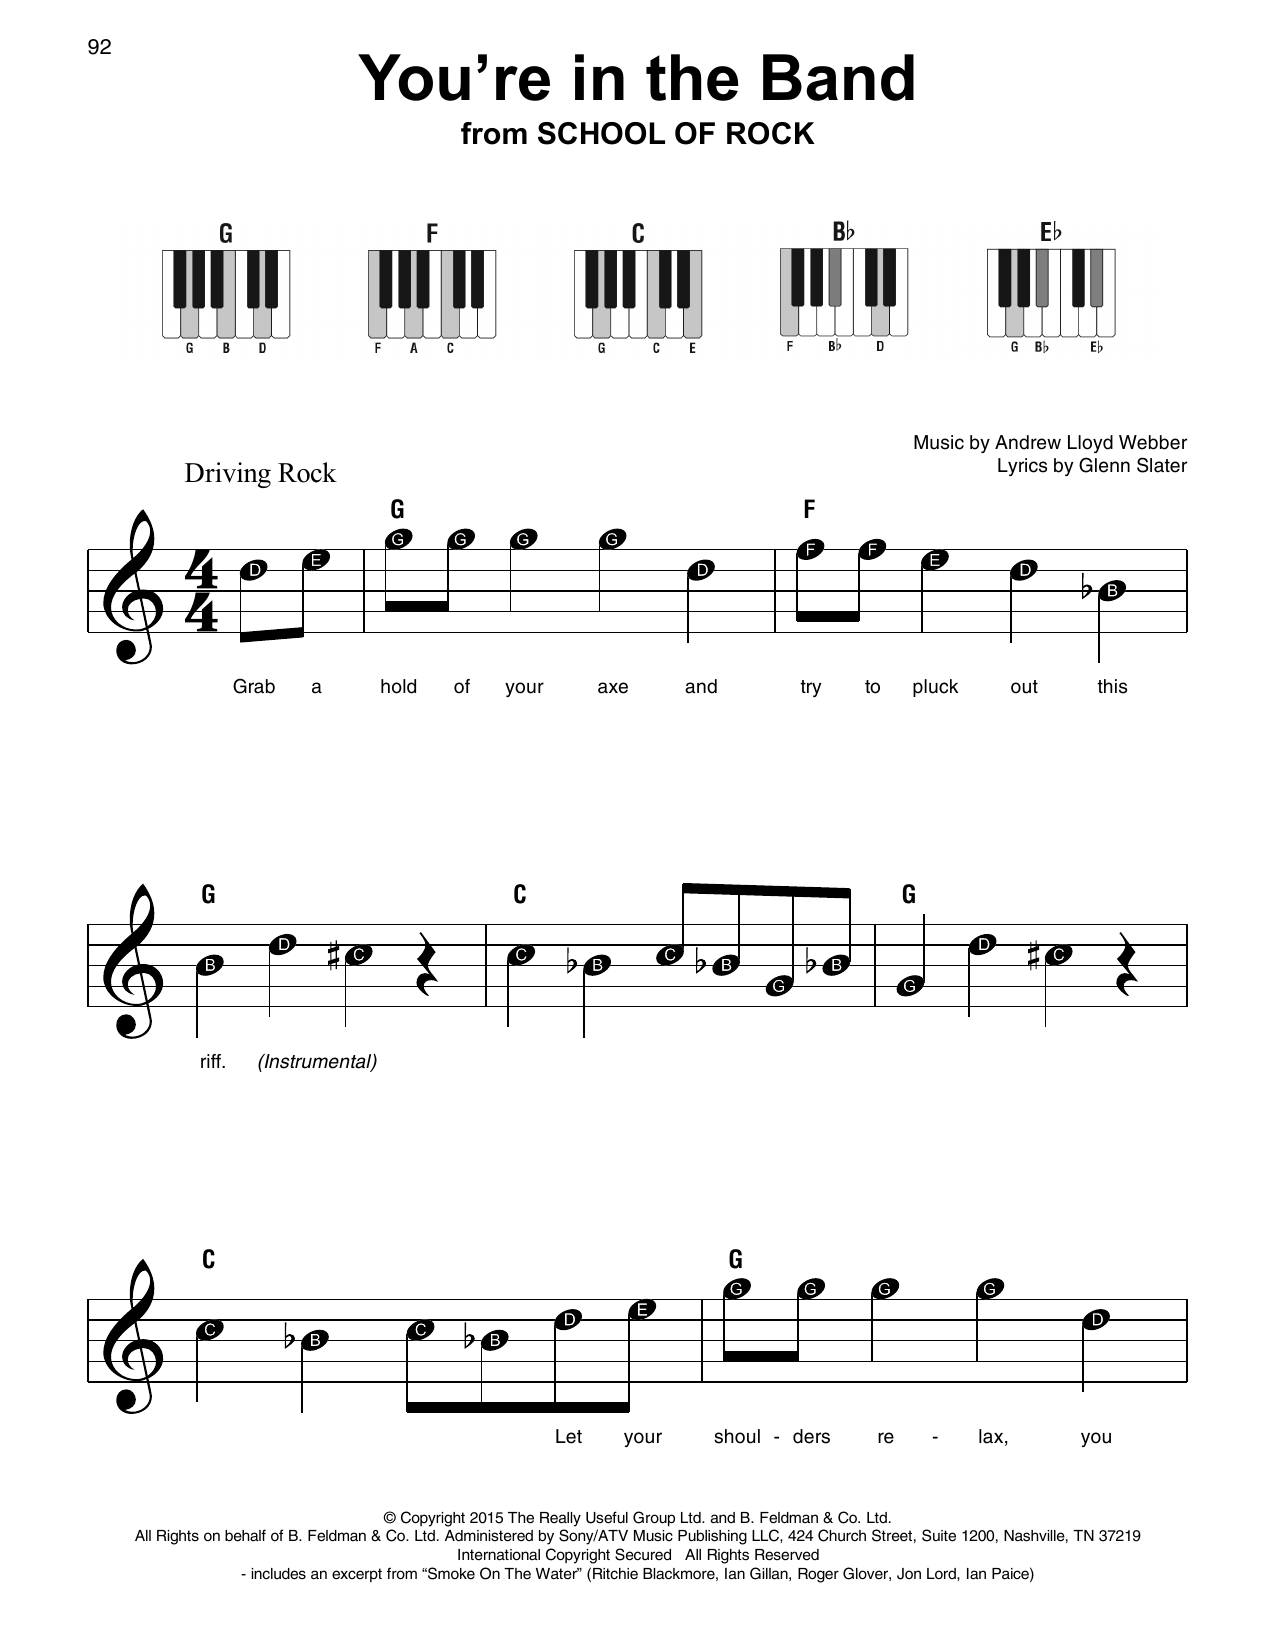 Download Andrew Lloyd Webber You're In The Band (from School of Rock Sheet Music